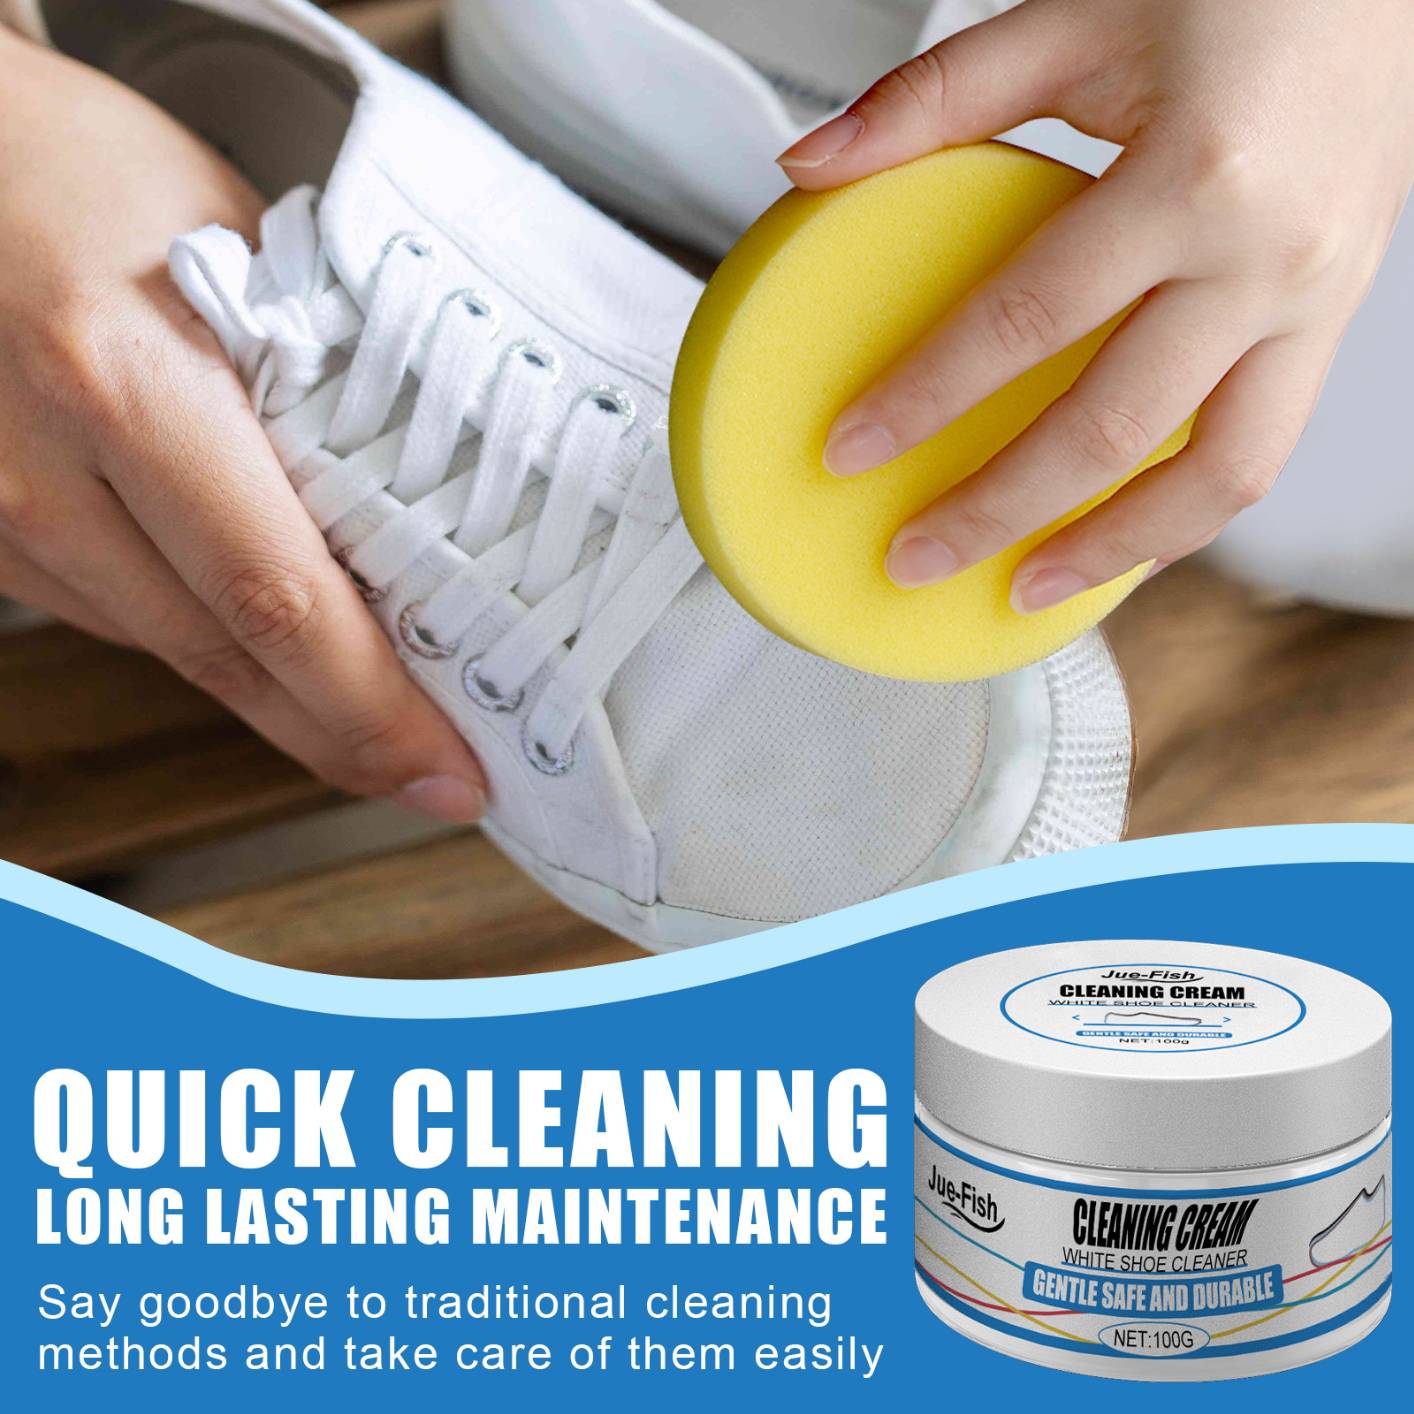 White Shoe Cleaning Cream, Shoe Cleaner Kit for White Shoes, Travel Shoes,  Leather Shoes, Sports Shoes, Canvas Shoes, Leather Bags, Car Interiors,  Tennis Sneaker Cleaning Kit, Stain Remover